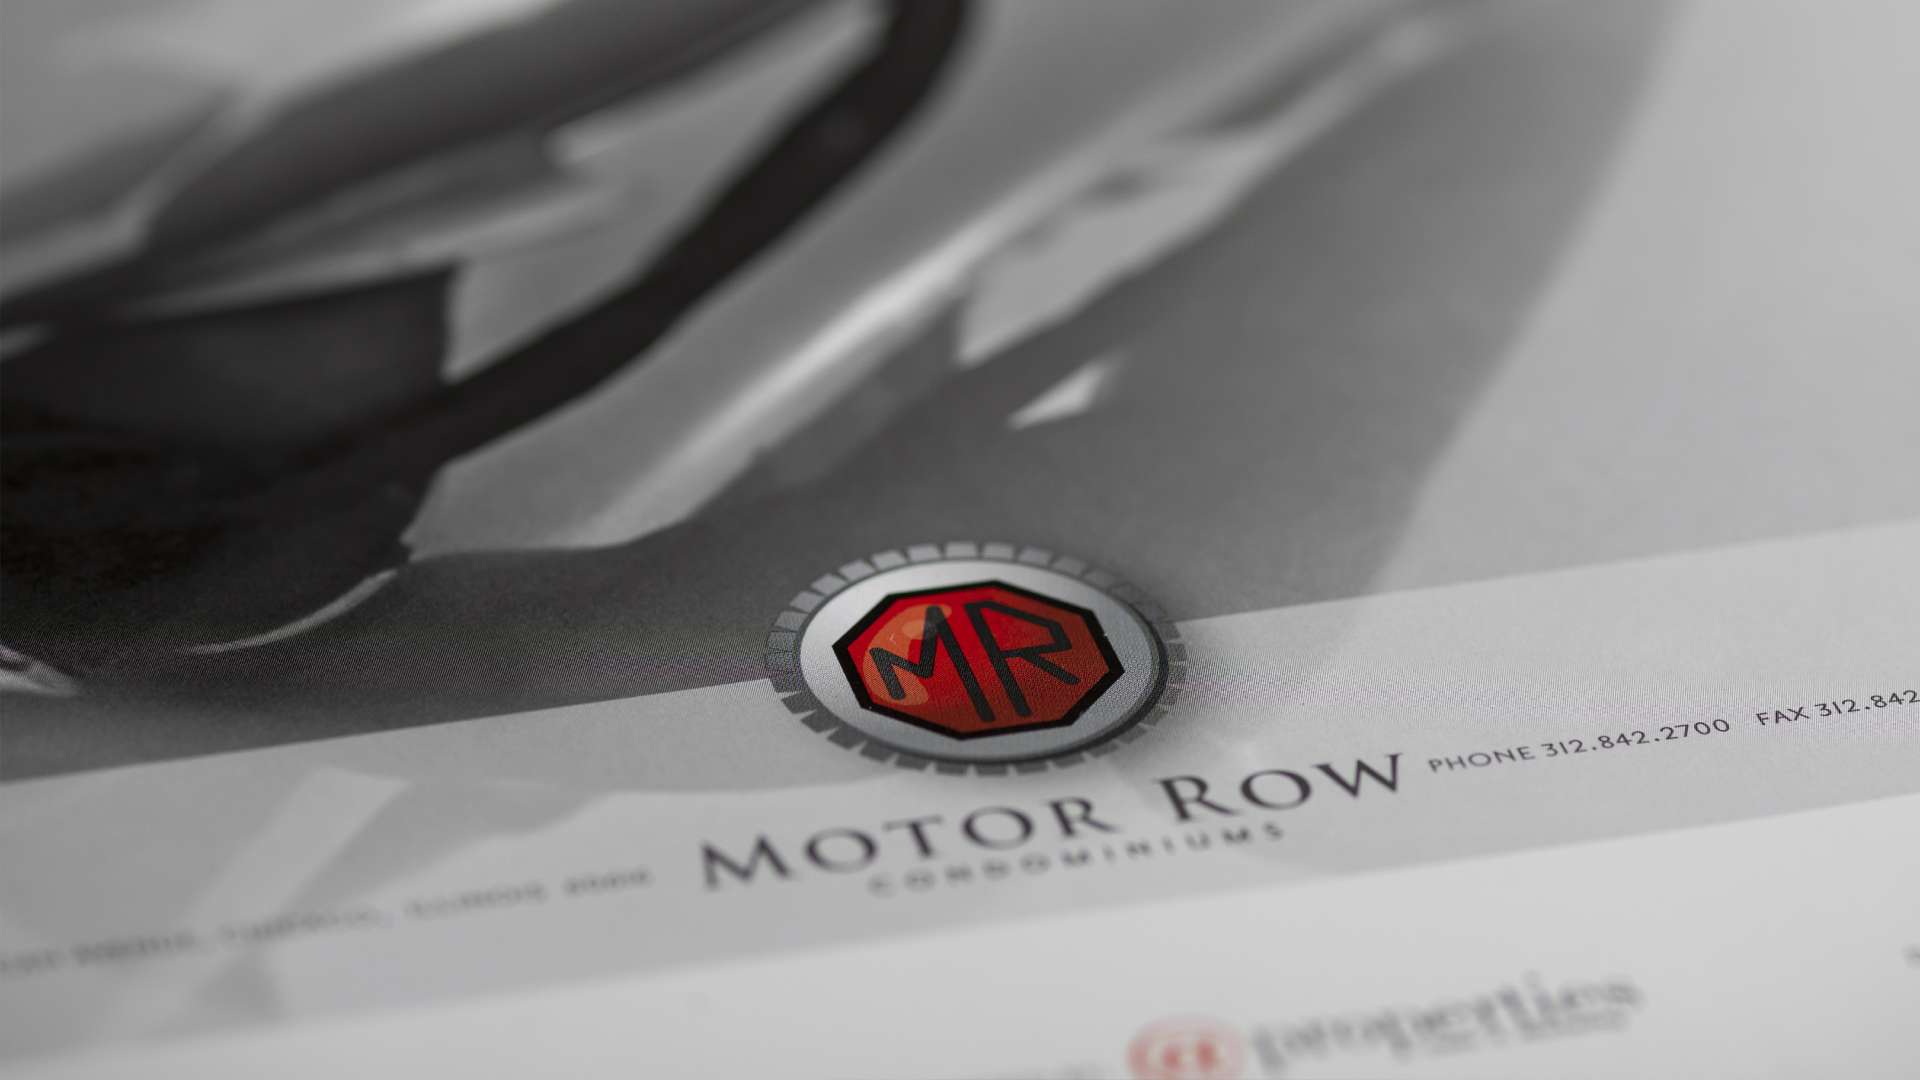 Print marketing collateral kit designed for Motor Row